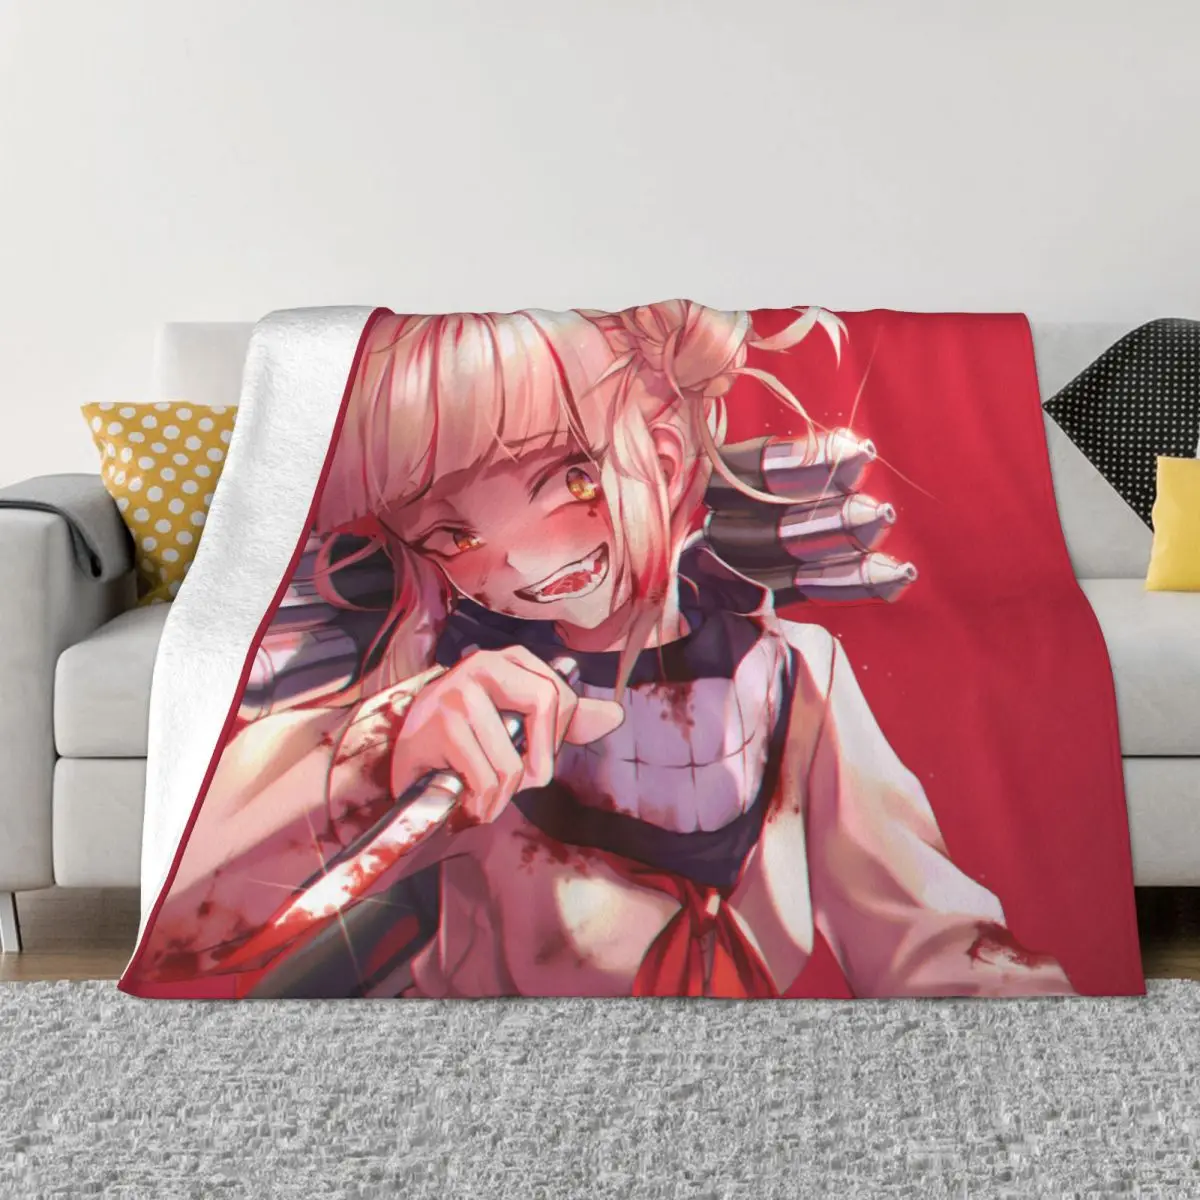 

Himiko Toga Flannel Throw Blankets Boku No My Hero Academia Anime Blanket for Home Bedroom Ultra-Soft Bedroom Quilt